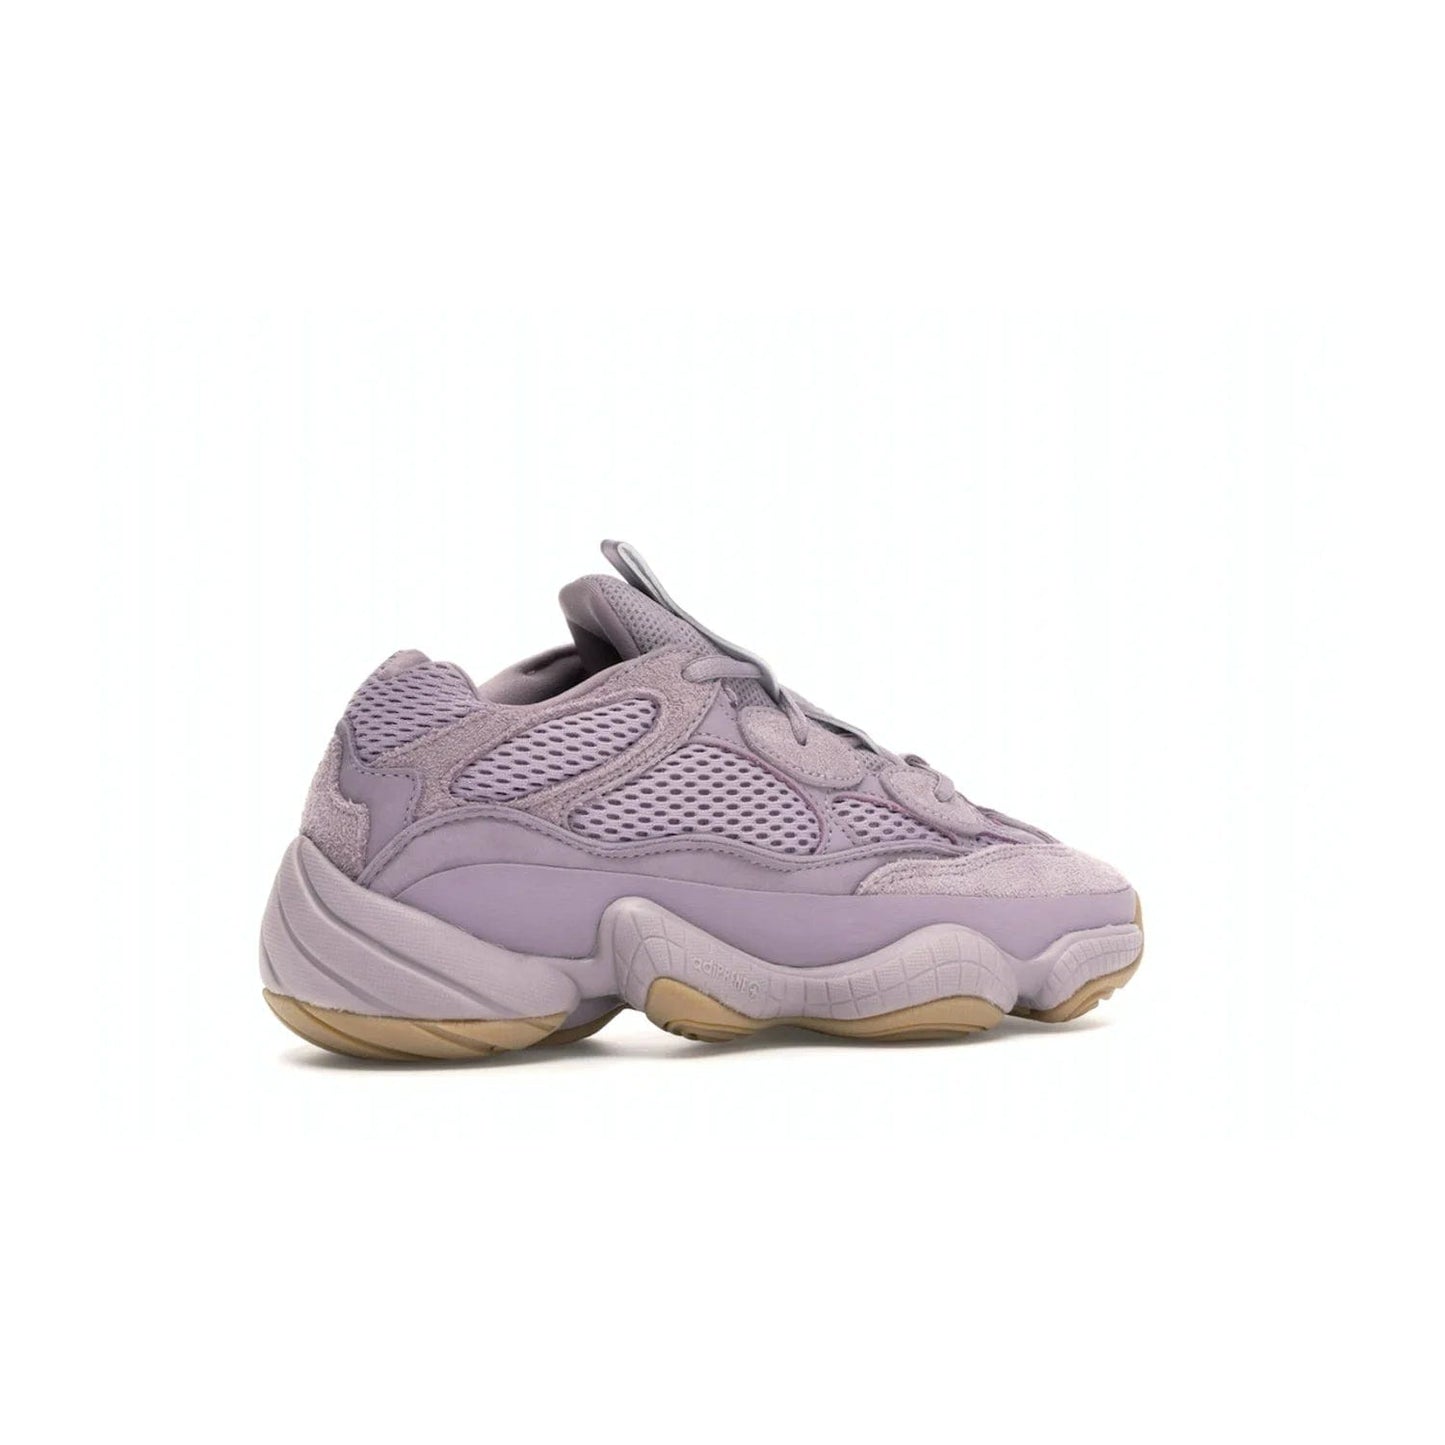 adidas Yeezy 500 Soft Vision - Image 34 - Only at www.BallersClubKickz.com - New adidas Yeezy 500 Soft Vision sneaker featuring a combination of mesh, leather, and suede in a classic Soft Vision colorway. Gum rubber outsole ensures durability and traction. An everyday sneaker that stands out from the crowd.